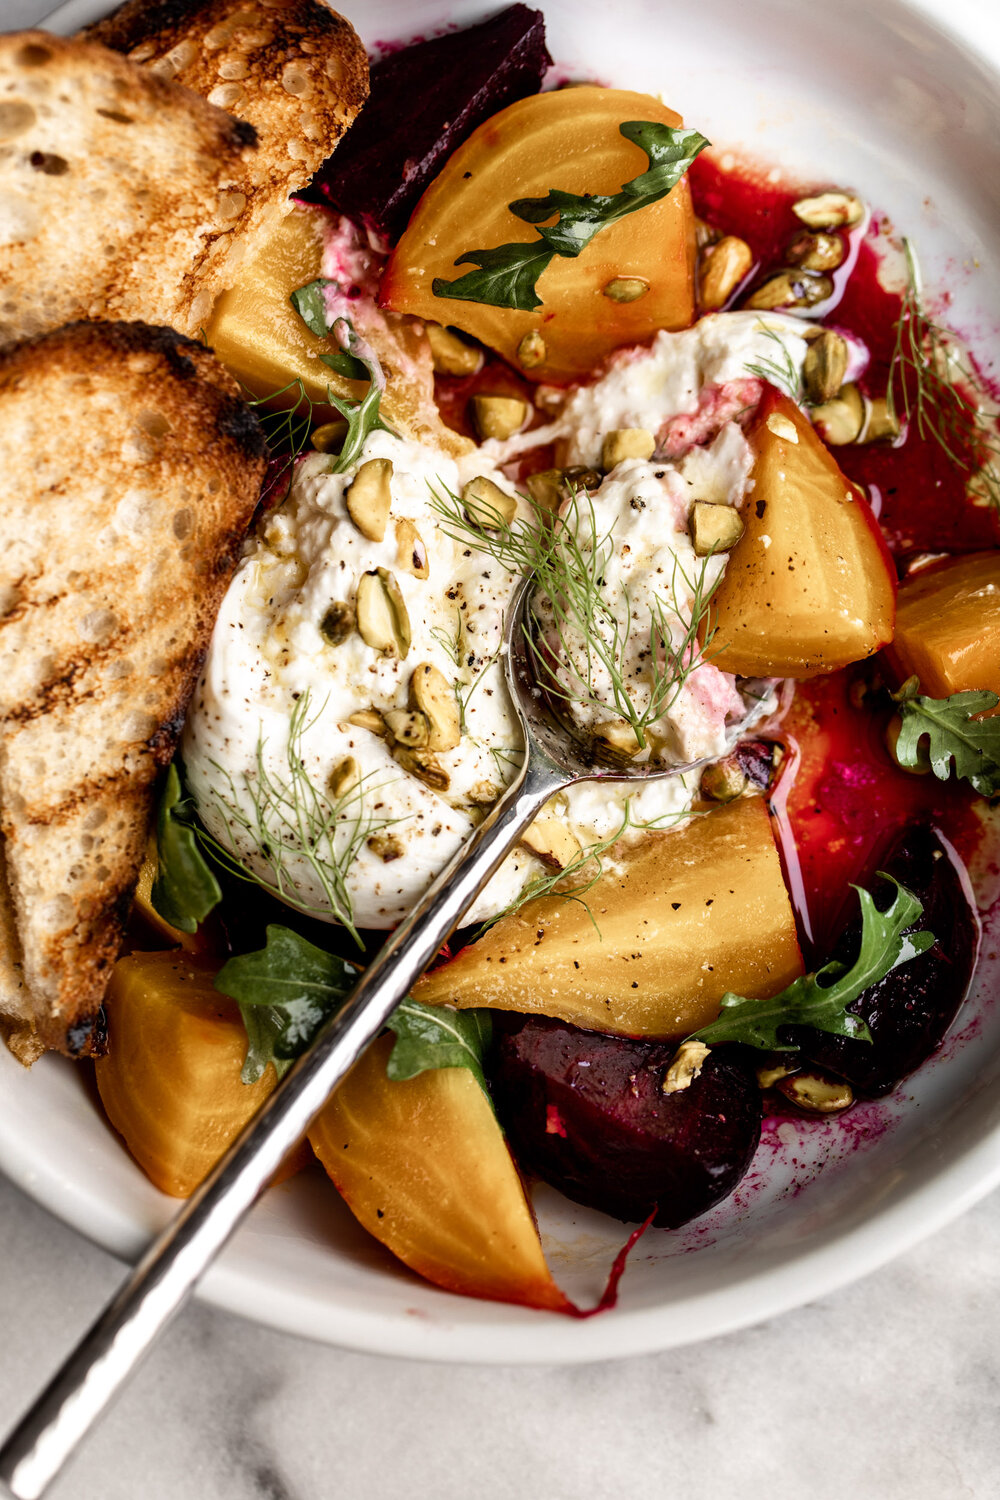 Roasted Beet Salad with Burrata topped with pistachio and fennel fronds